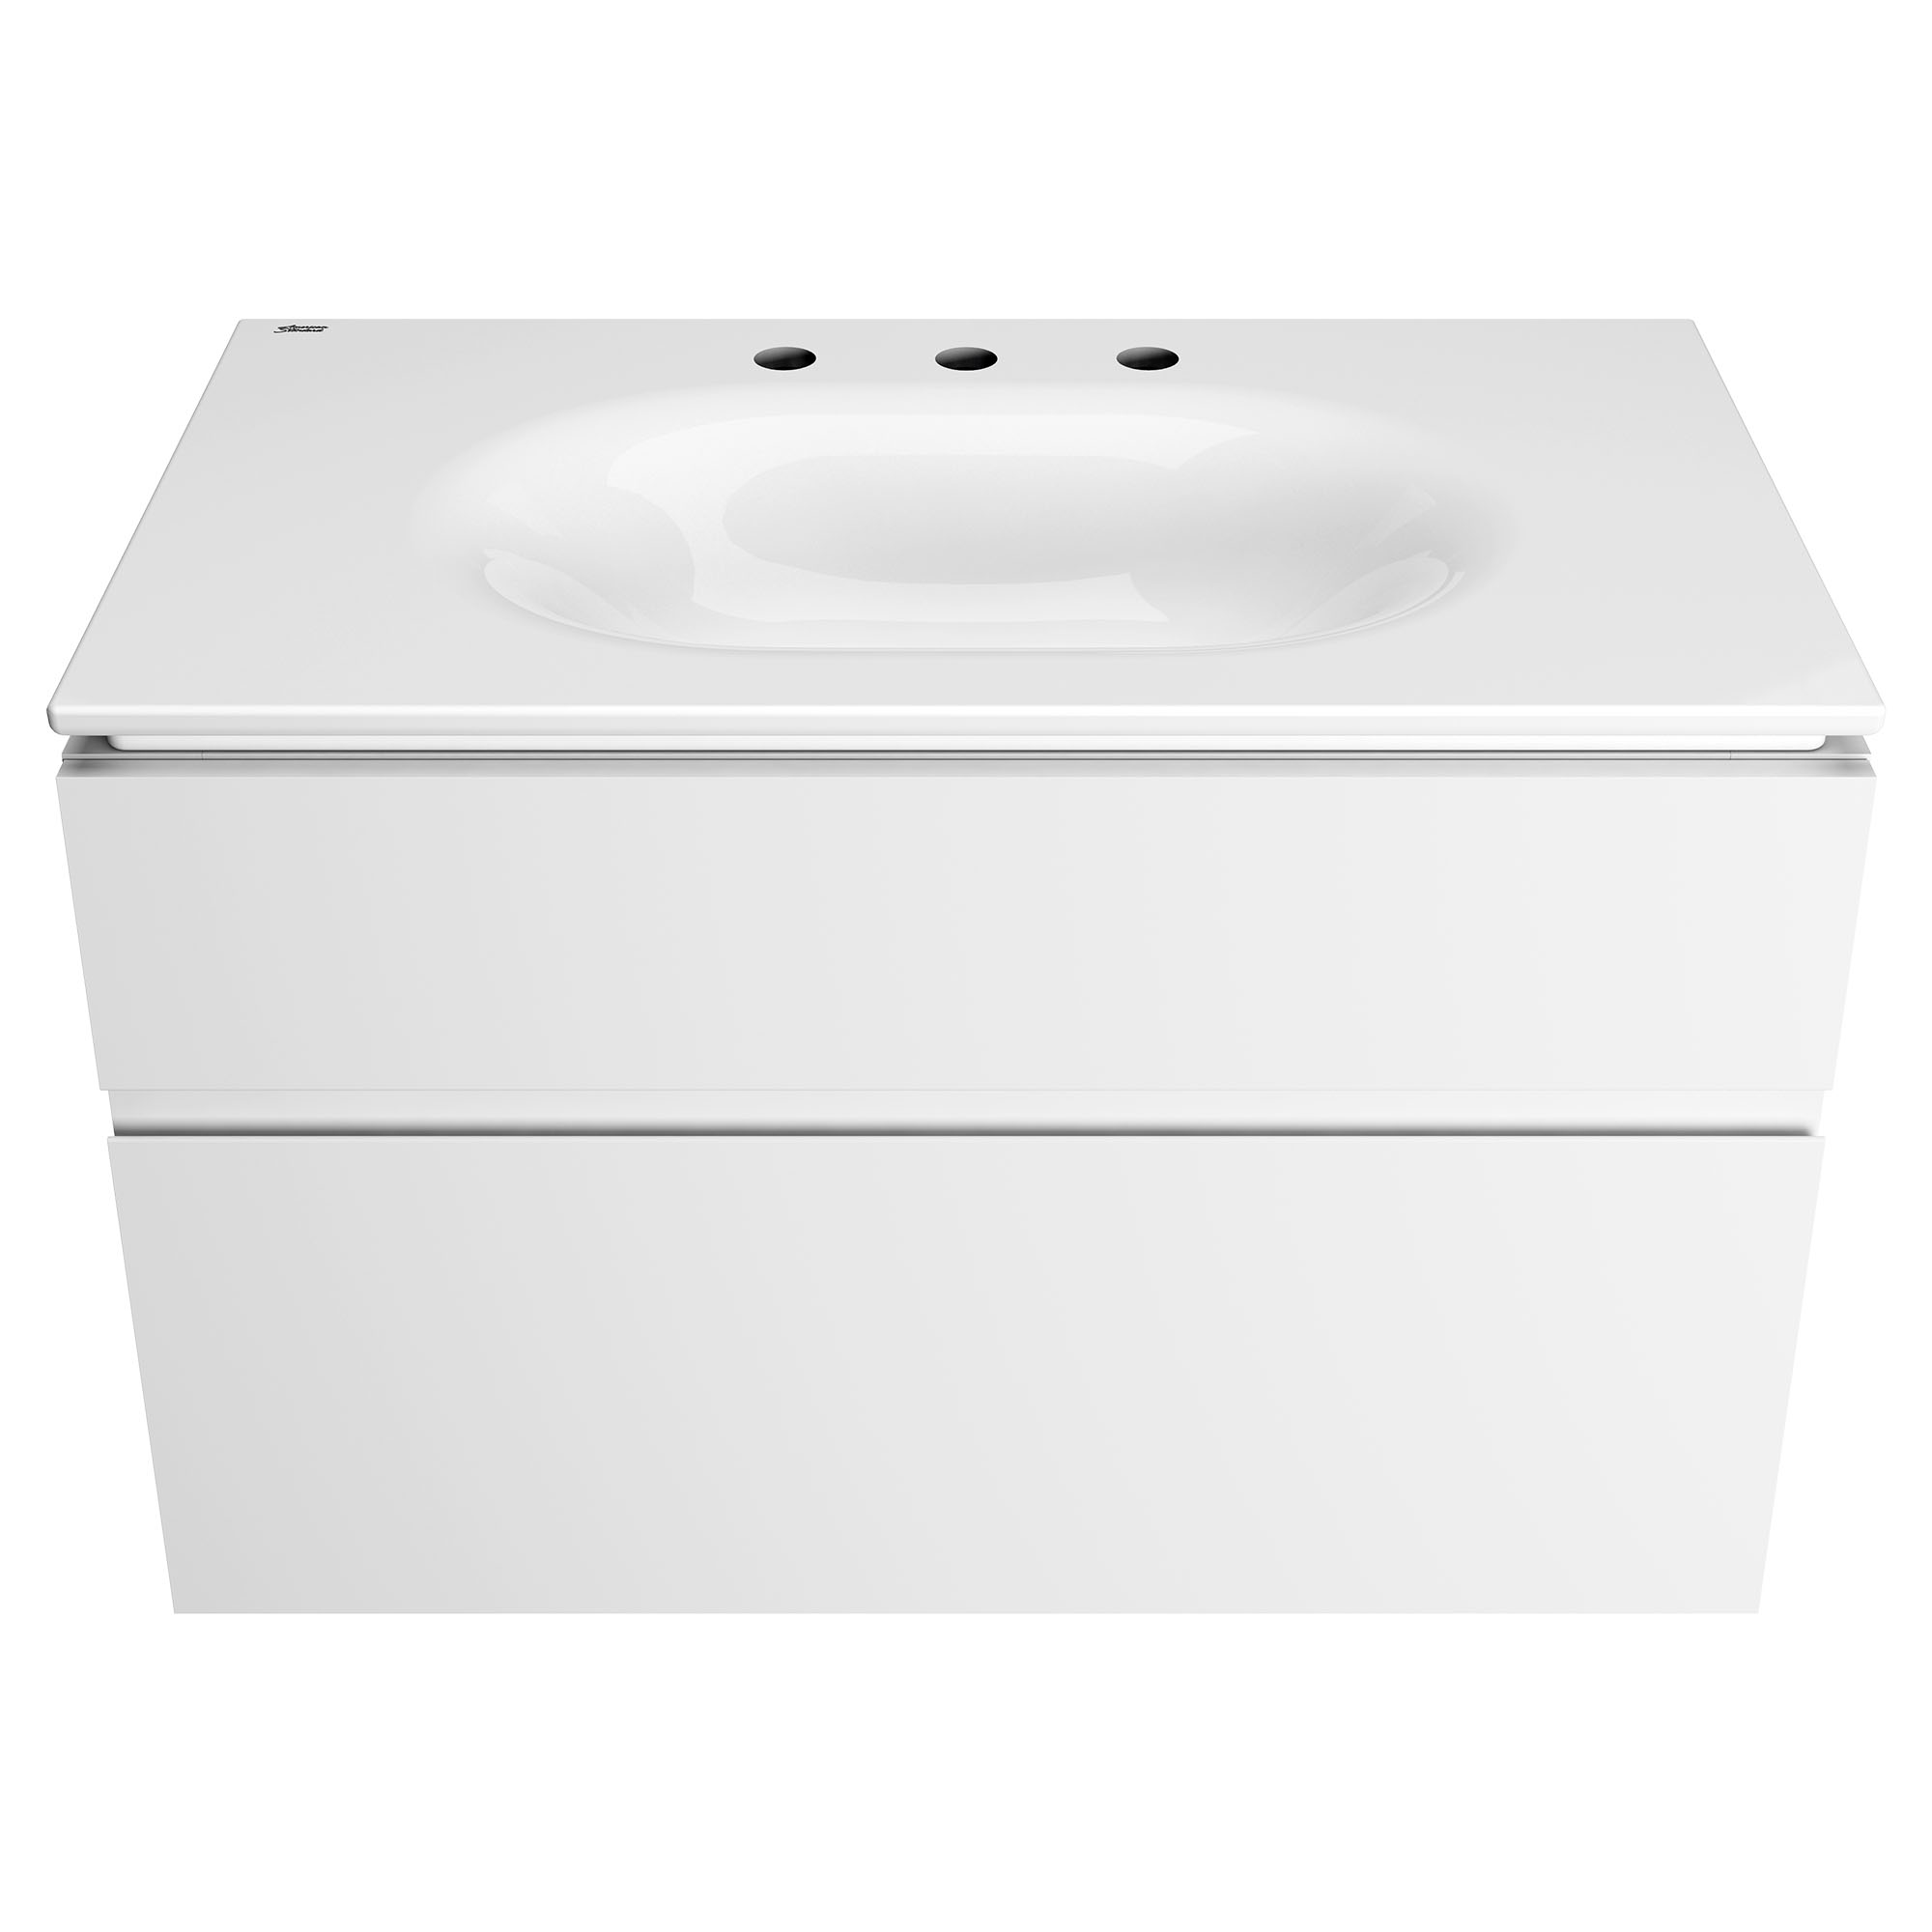 Studio™ S 33-Inch Vitreous China Vanity Sink Top 8-Inch Centers